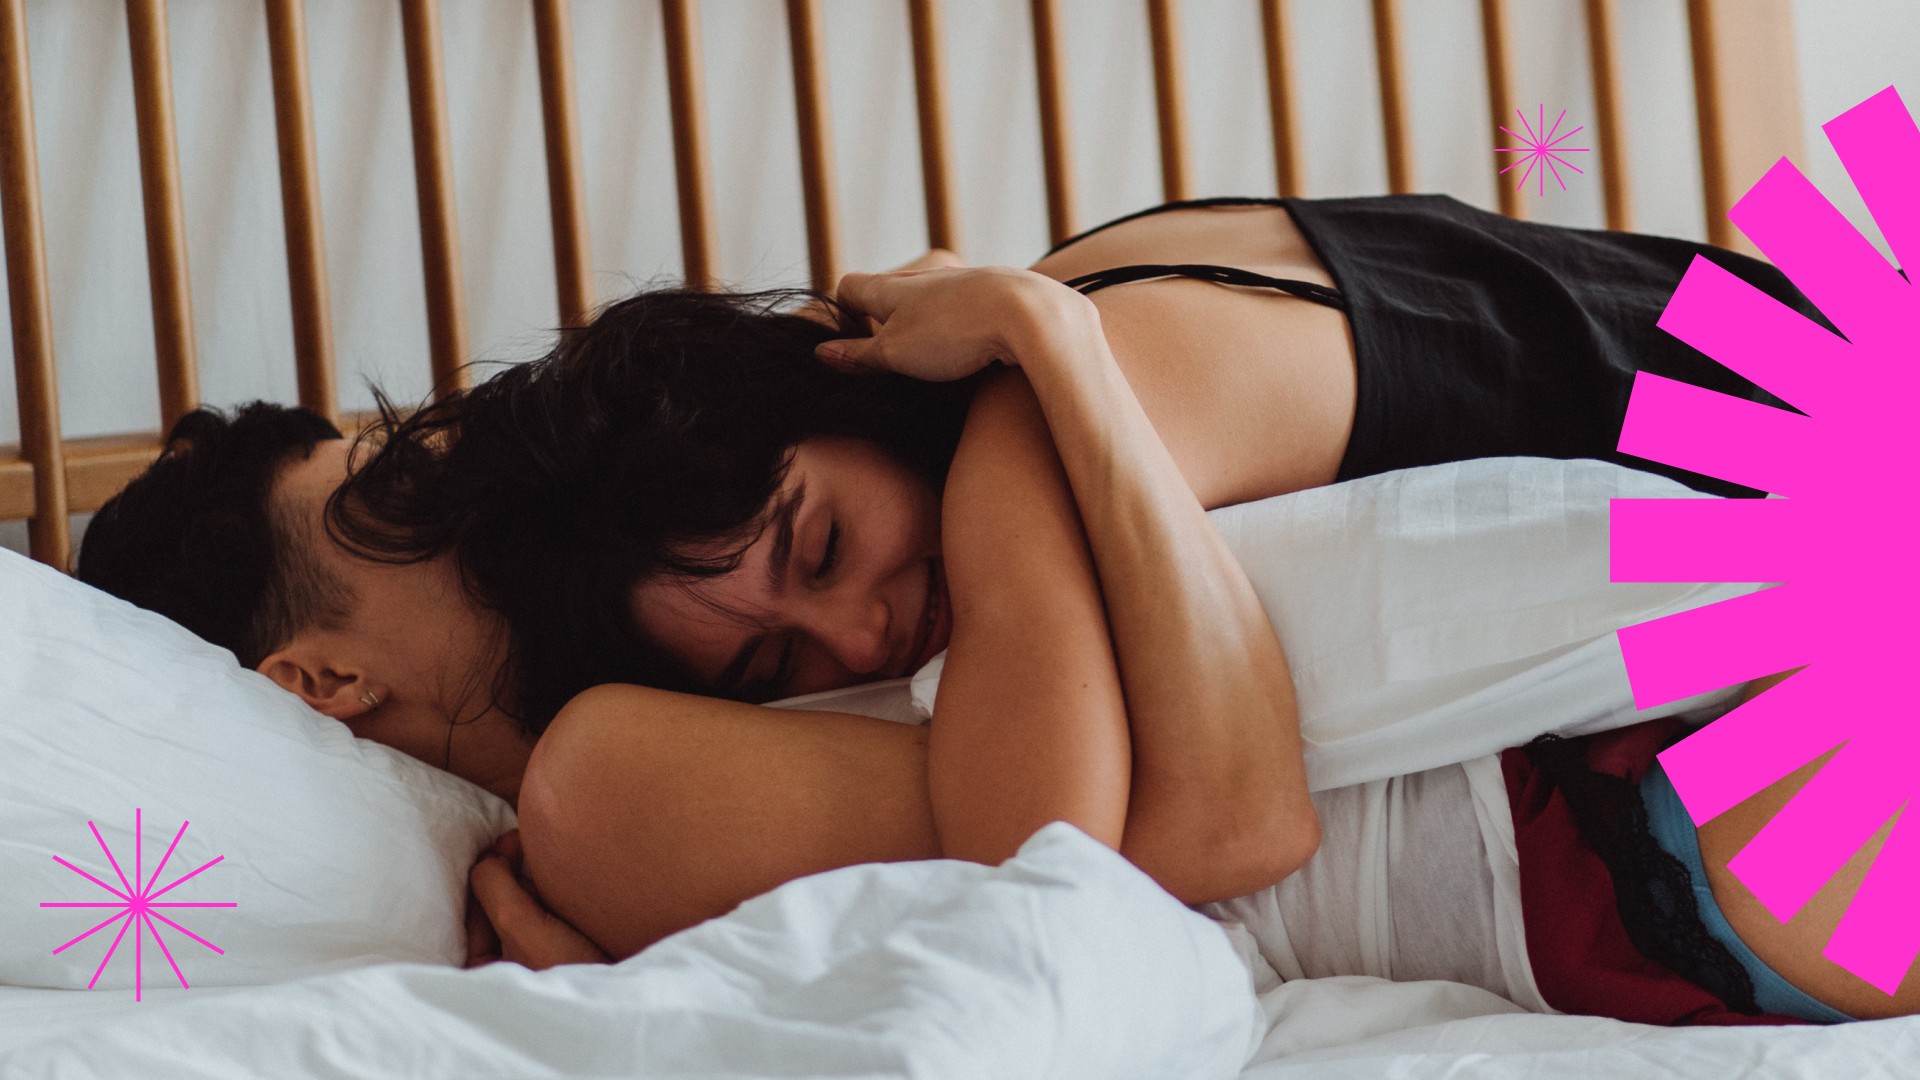 Things I wish I had known about sex before my first time